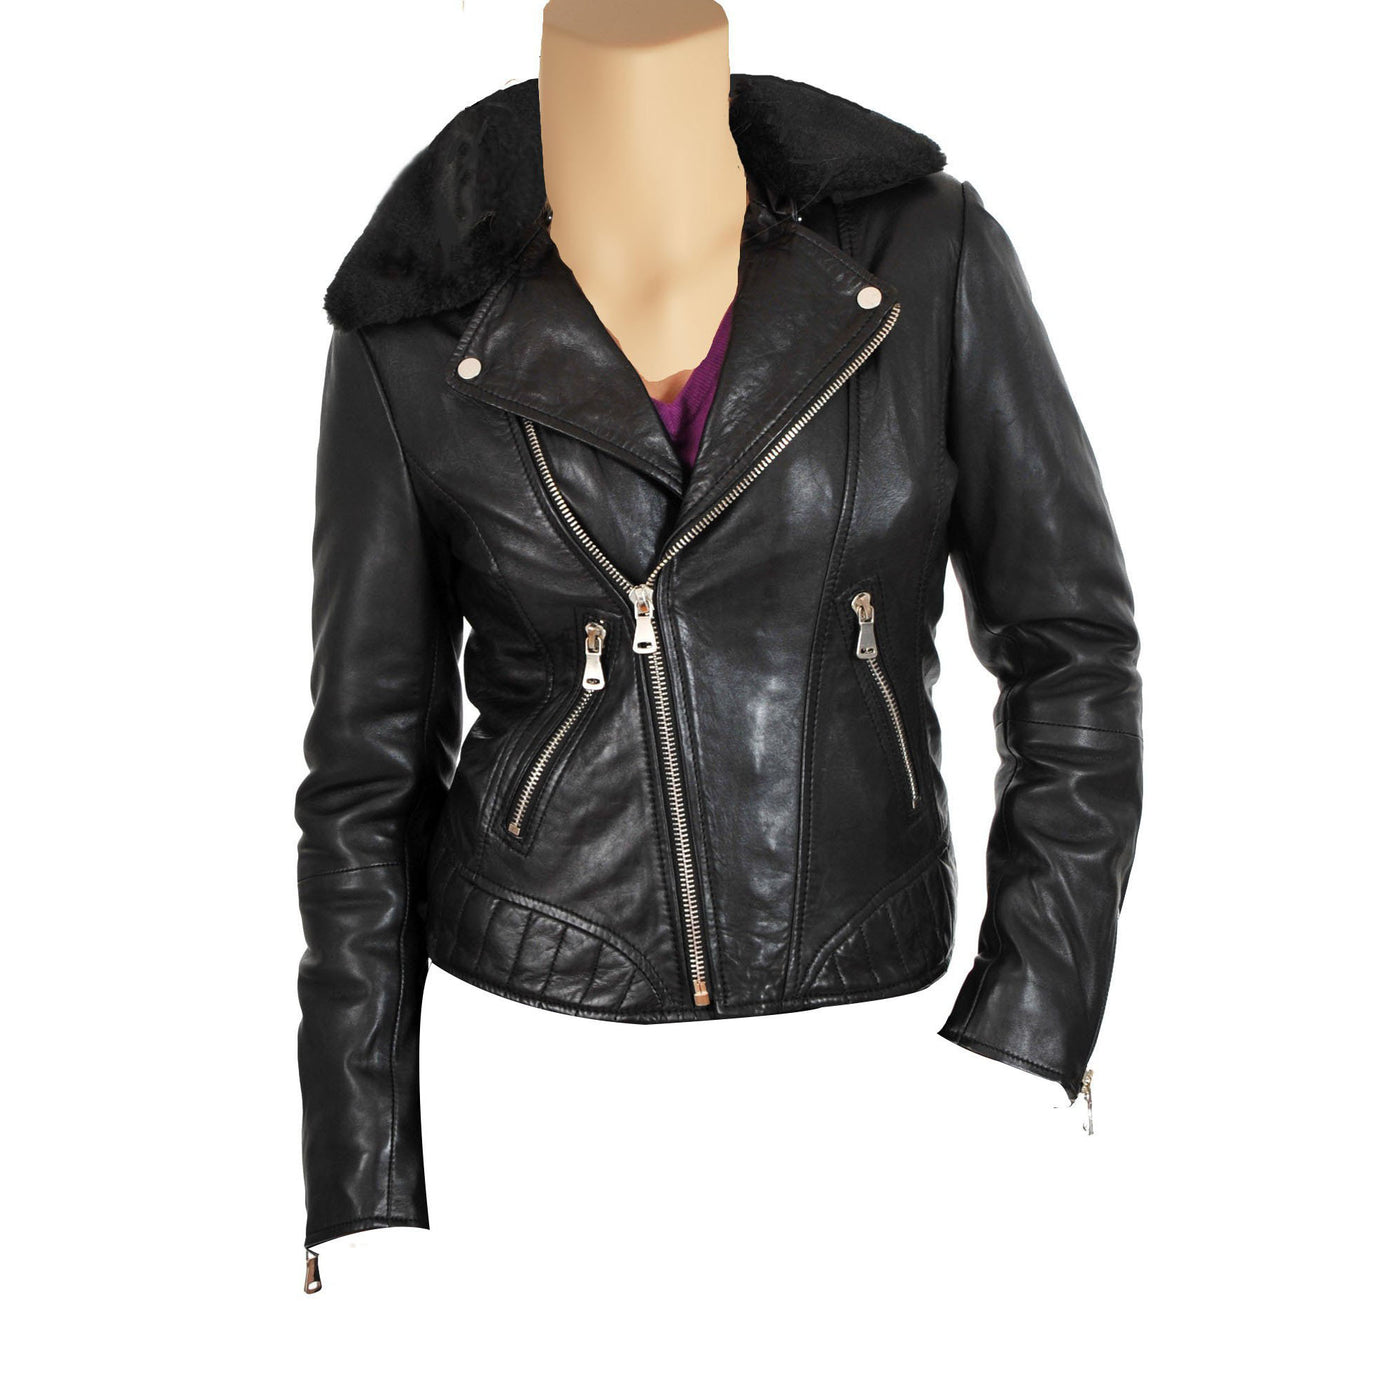 Women's biker style leather jacket with fur collars - Lusso Leather - 1